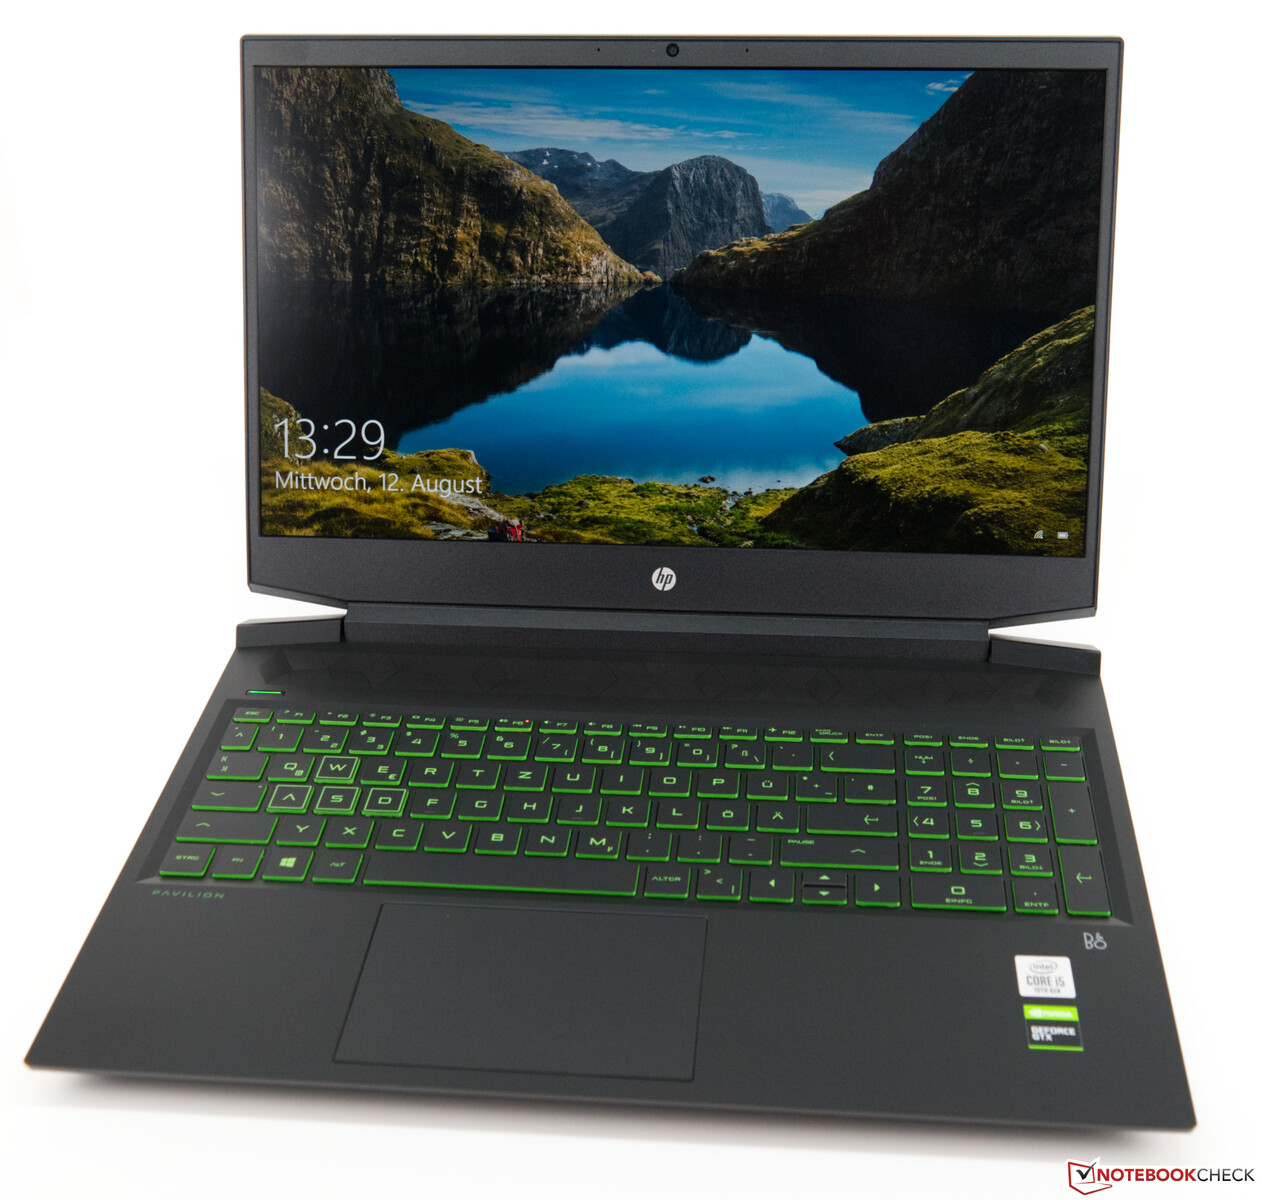 Low-priced HP Pavilion Gaming 16 laptop with a 16.1-inch display and GeForce graphics